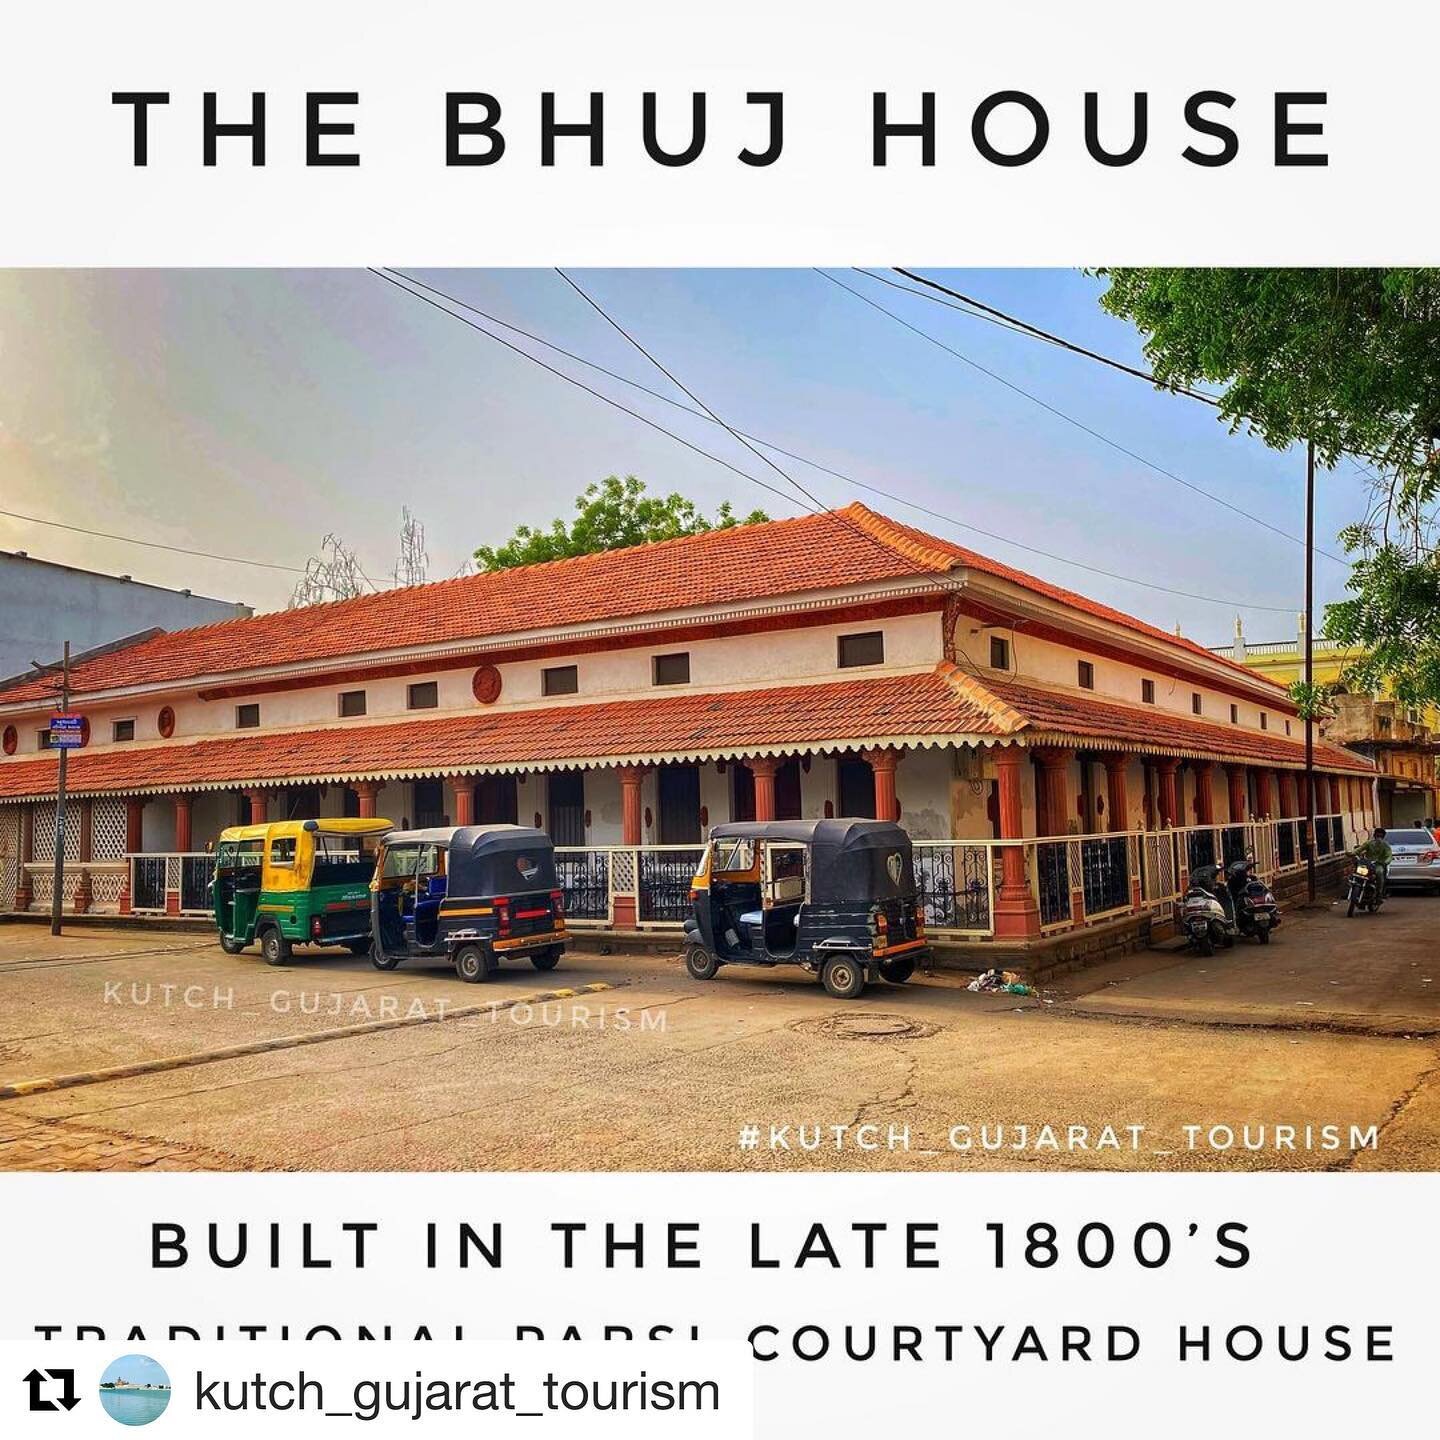 Thank you @kutch_gujarat_tourism for taking and sharing this very nice picture of our house! ☺️

#Repost @kutch_gujarat_tourism with @get_repost
・・・
THE BHUJ HOUSE, BHUJ, KUTCH.🏘🏰🏯🏜🏞🌲❤️

About:- The Bhuj House is a traditional Parsi courtyard h